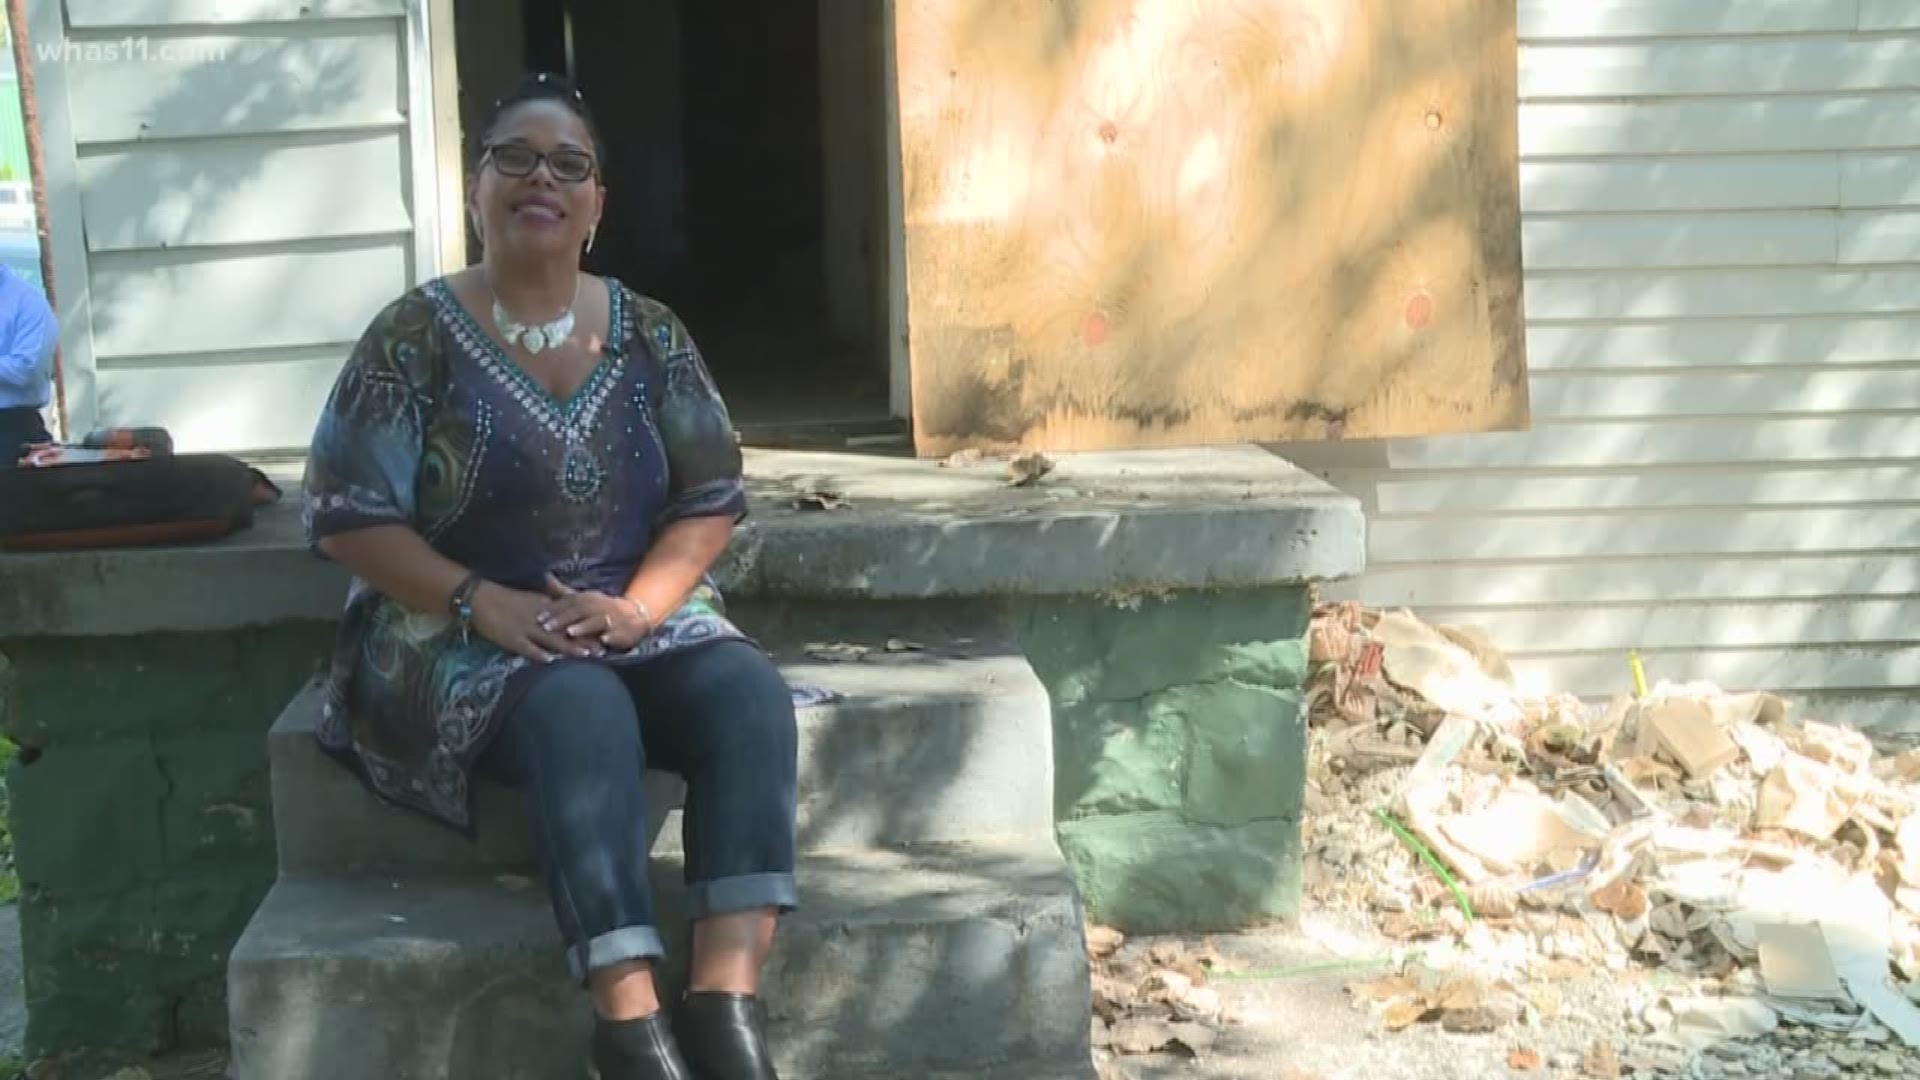 Rose Smith's son was killed in front of an abandoned home 4 years ago. Last year, she bought that property with the intention to turn it into a community center.